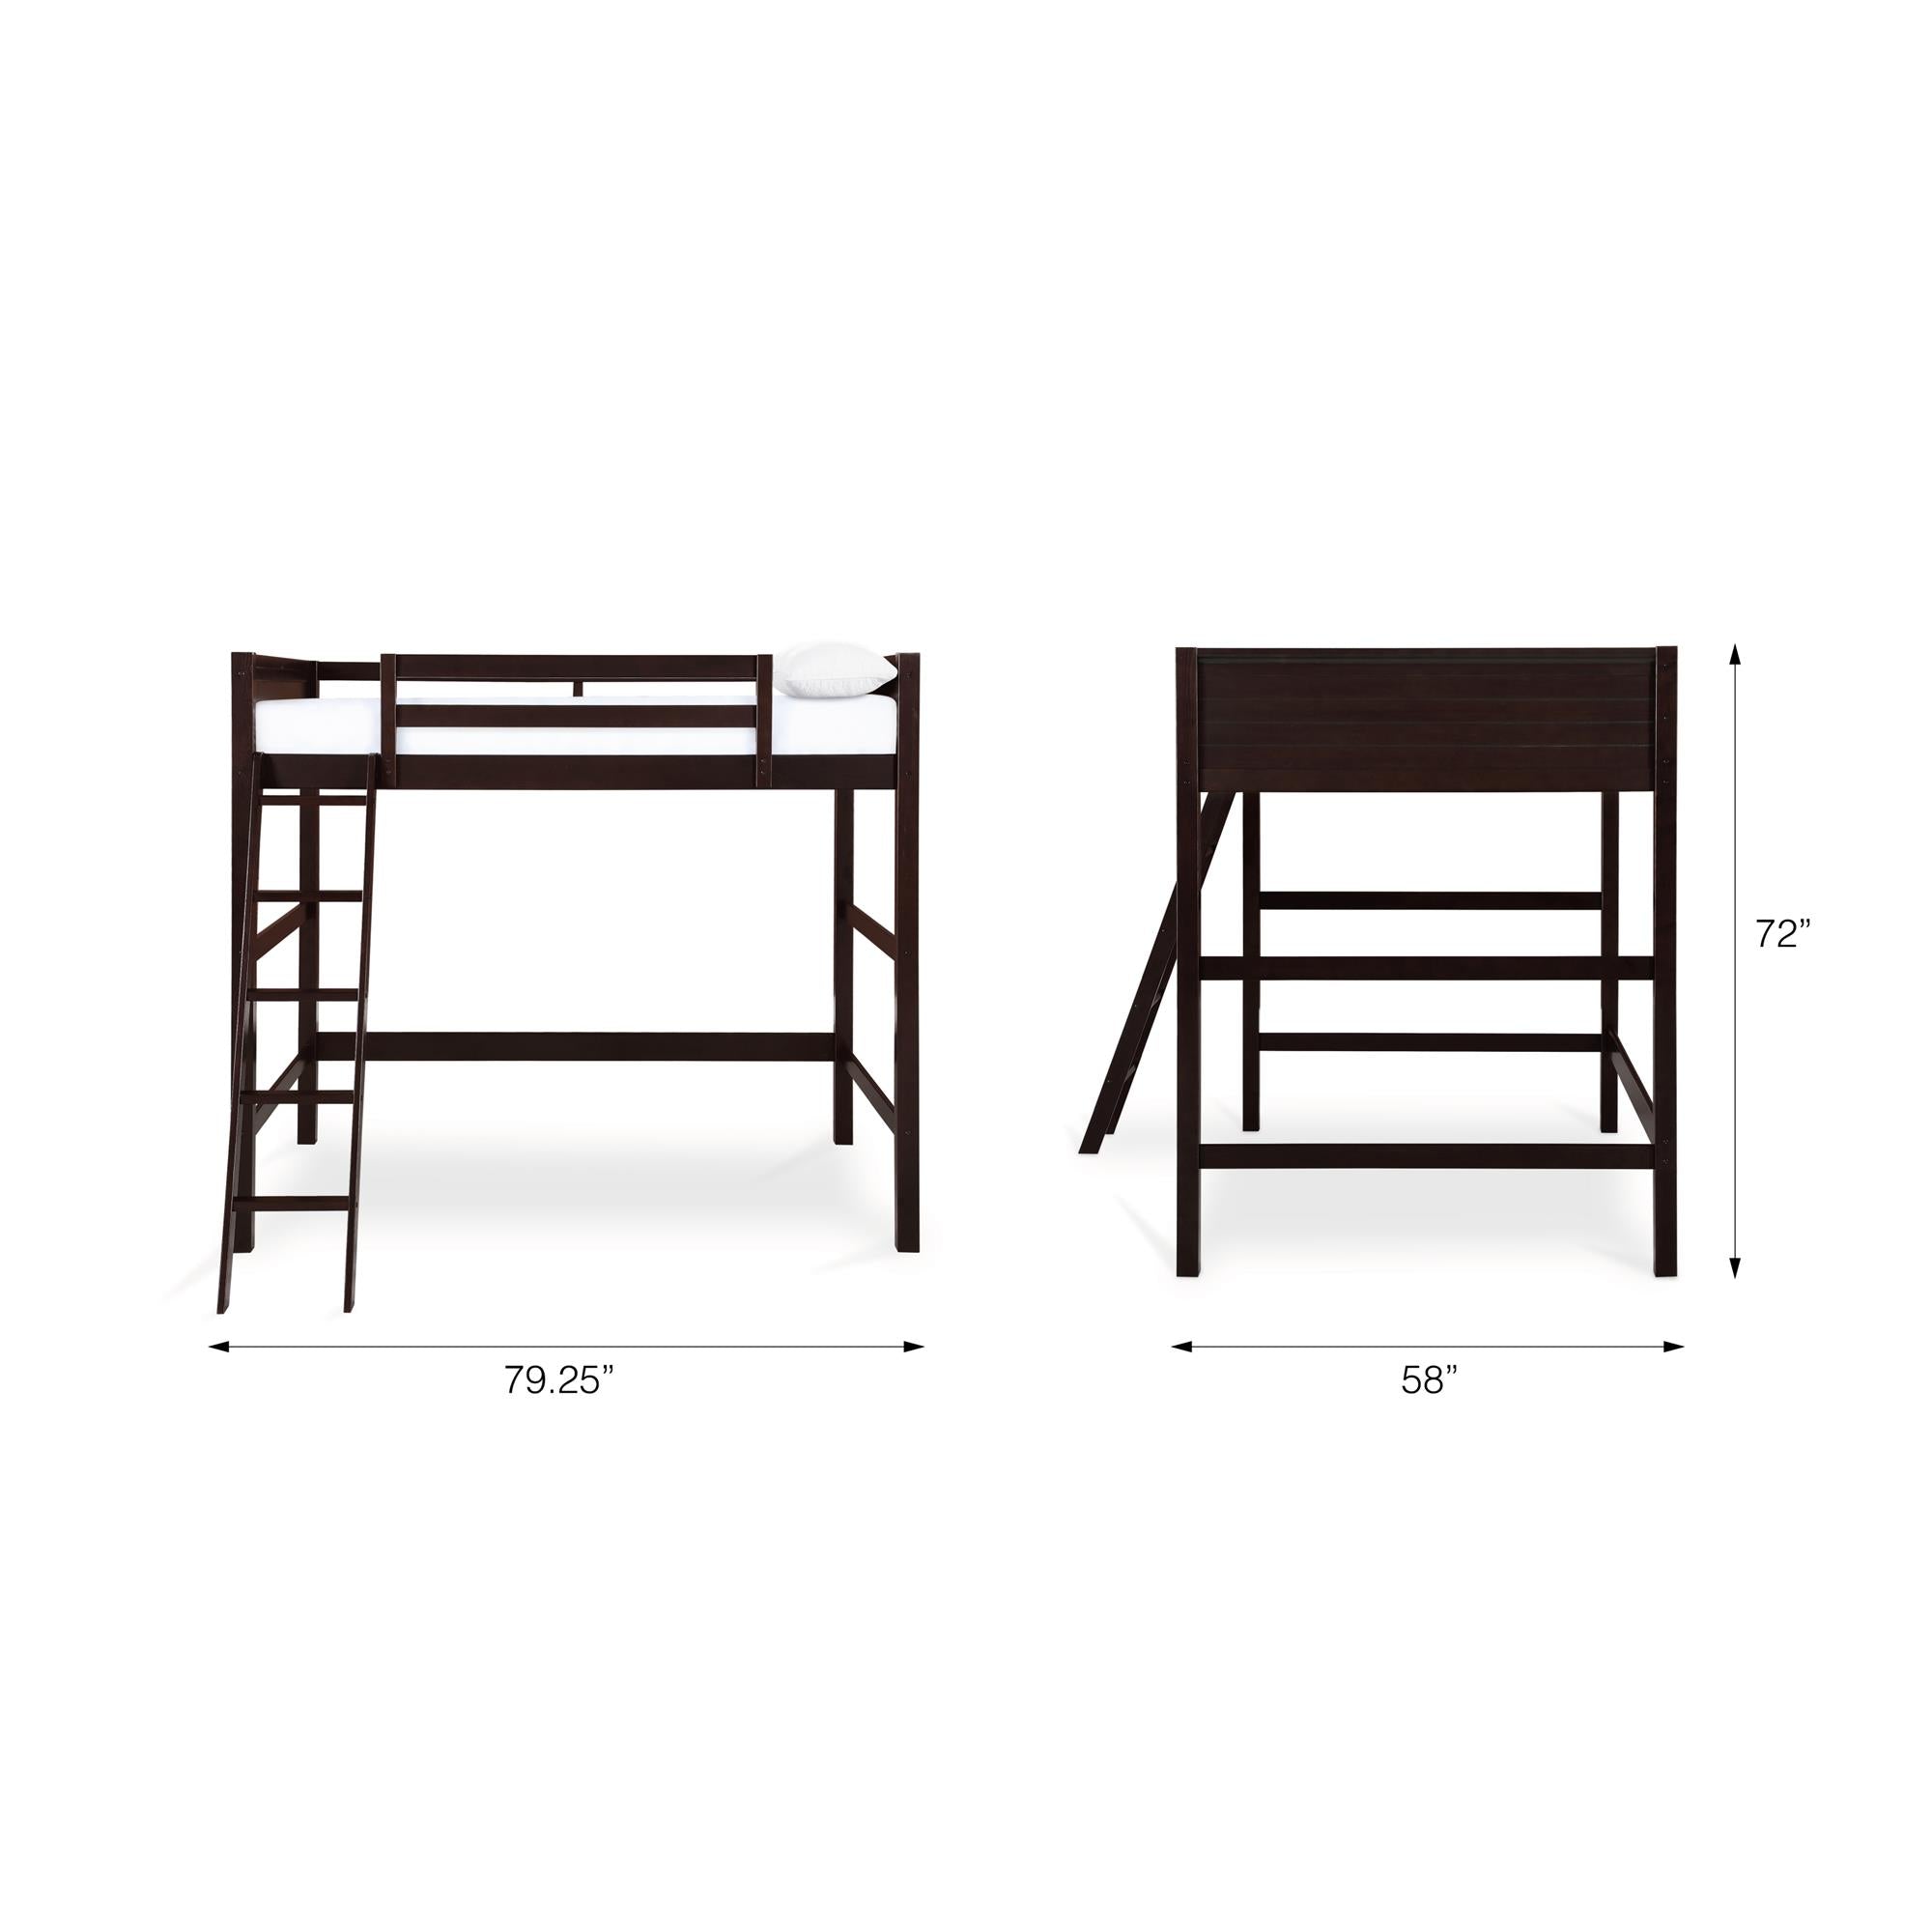 Your Zone Kids Wooden Loft Bed with Ladder, Full, Espresso